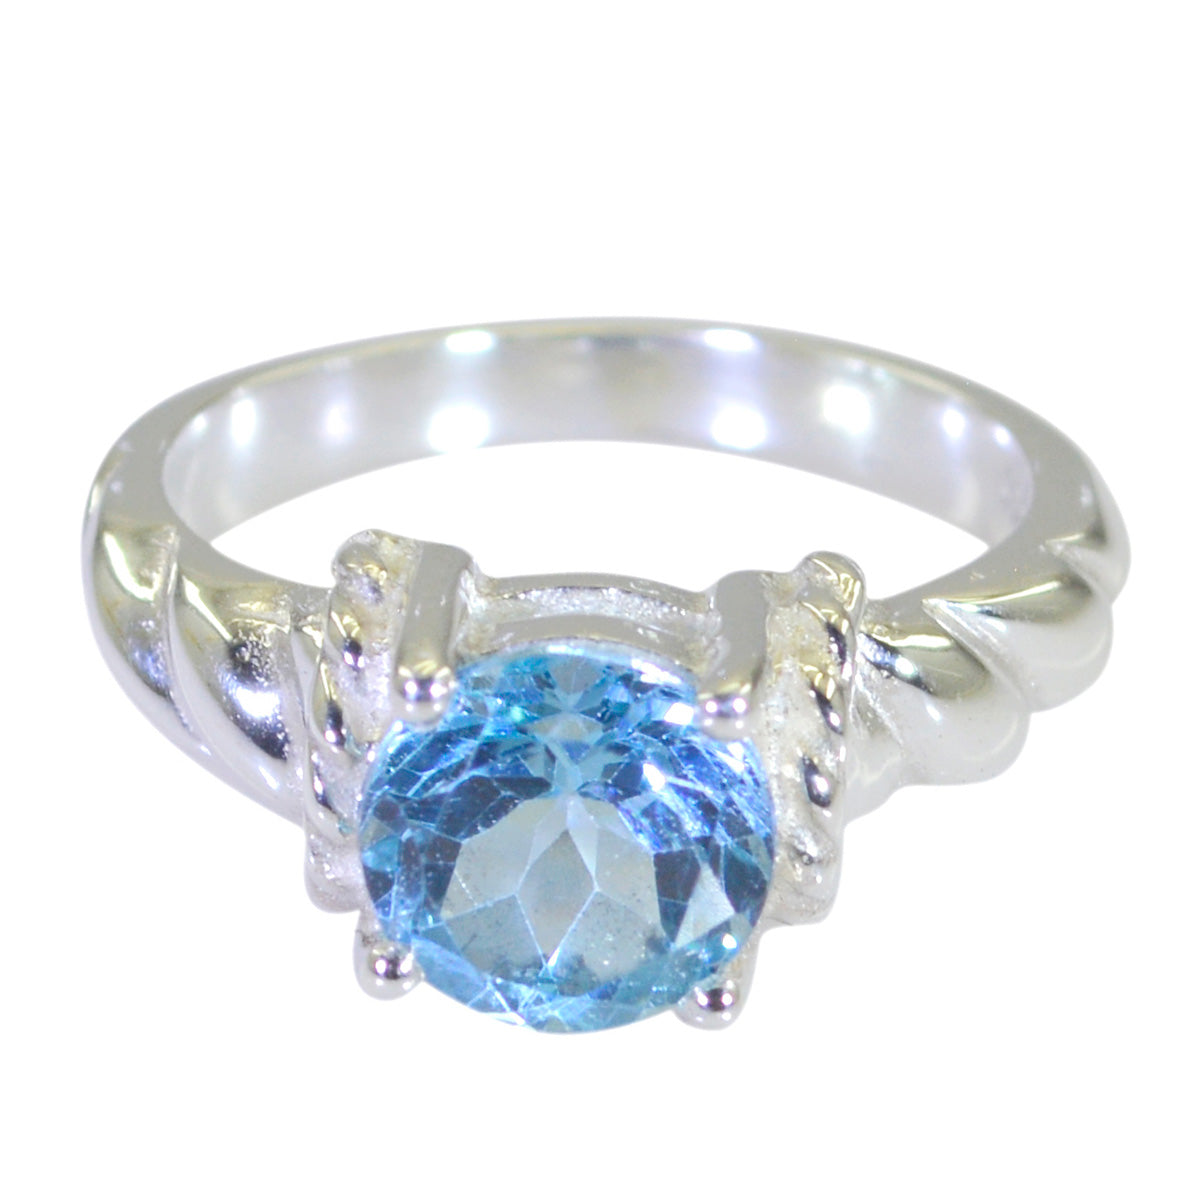 Seductive Gemstone Blue Topaz Sterling Silver Rings Jewelry Scale